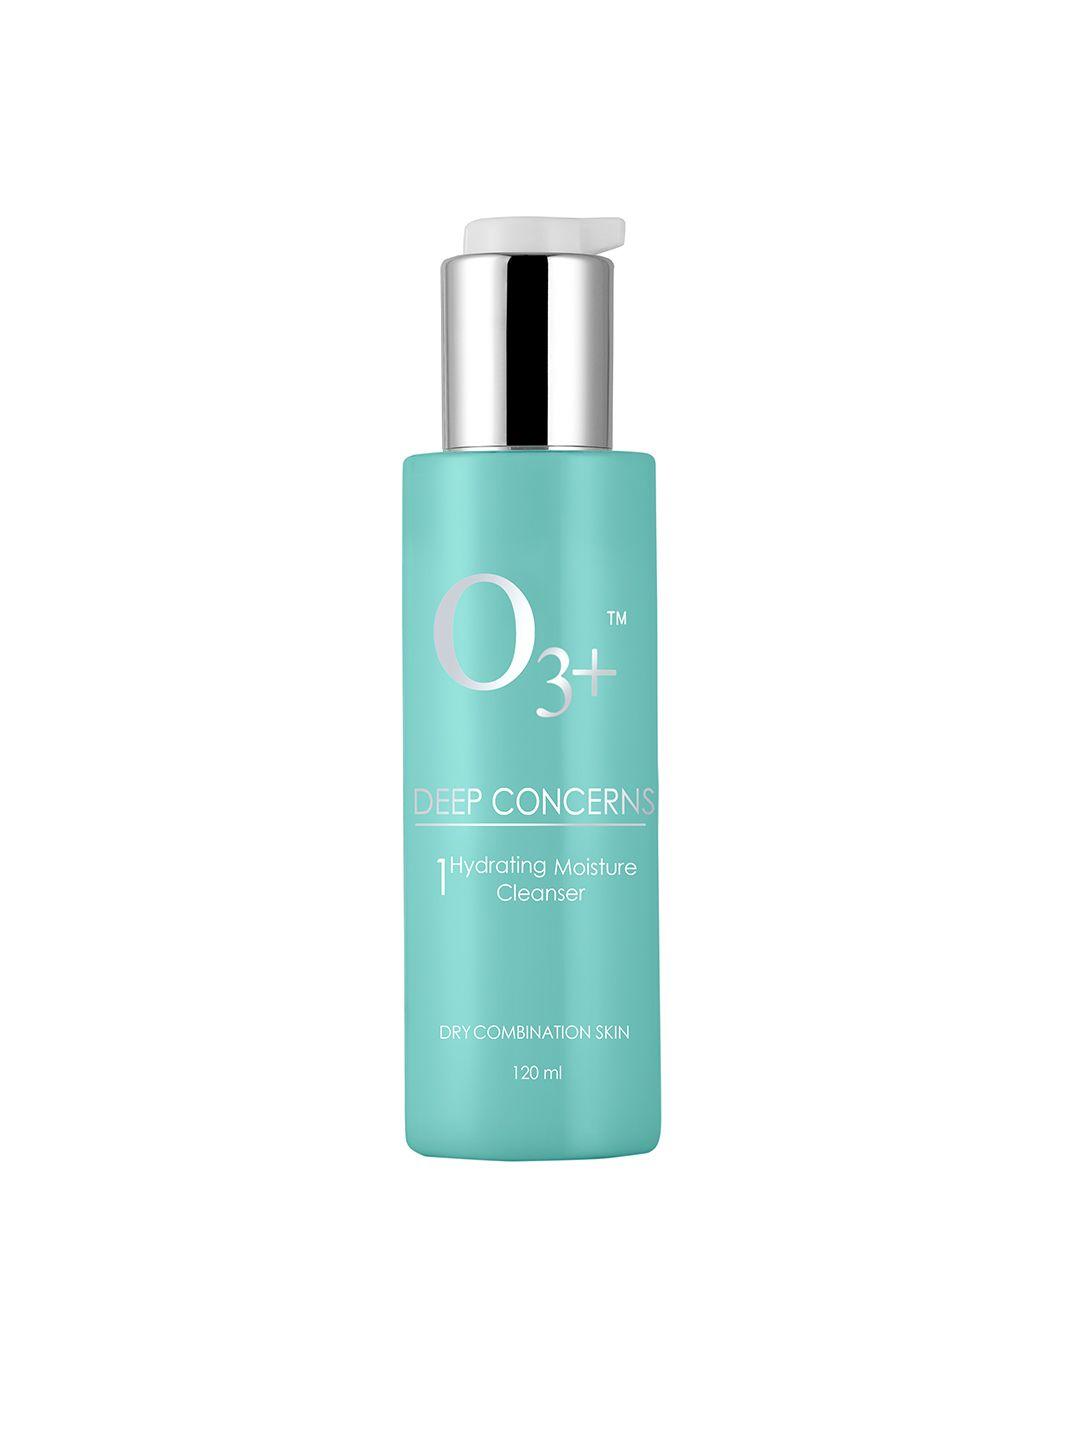 o3 deep concerns 1 hydrating moisture cleanser for combination skin 120 ml